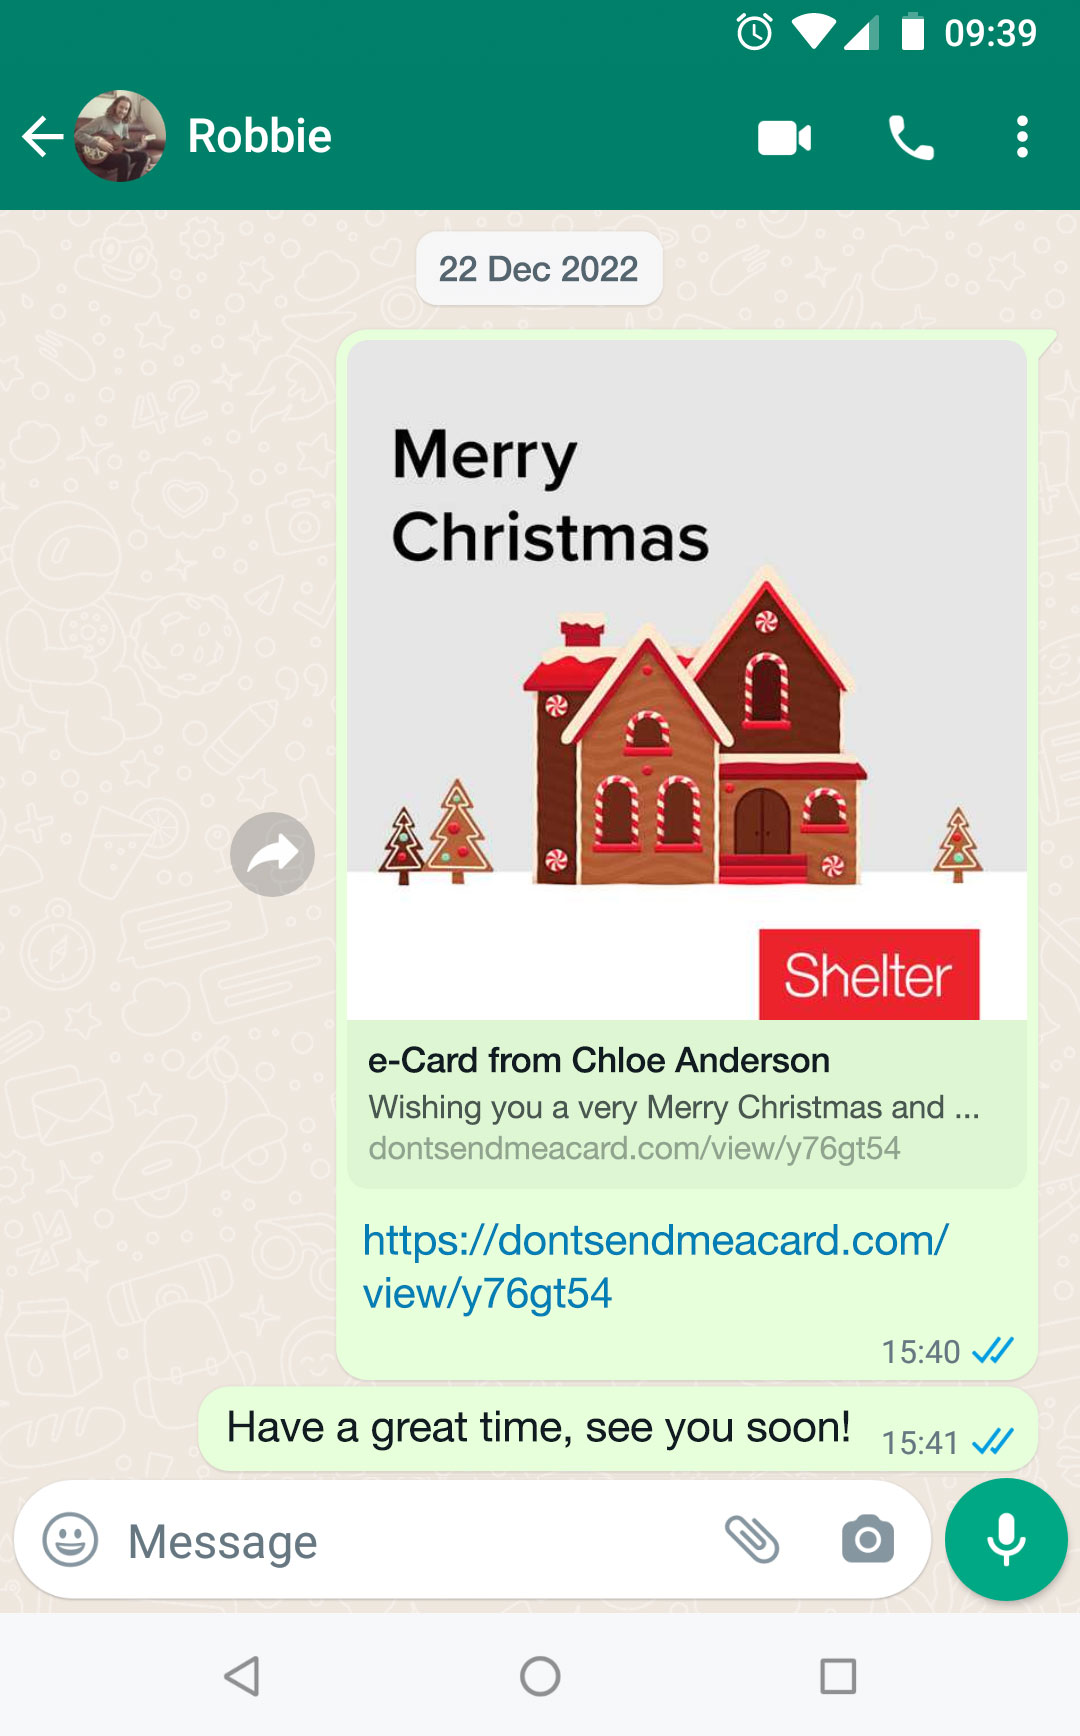 whatsapp-ecards-share-to-whatsapp-send-online-for-charity